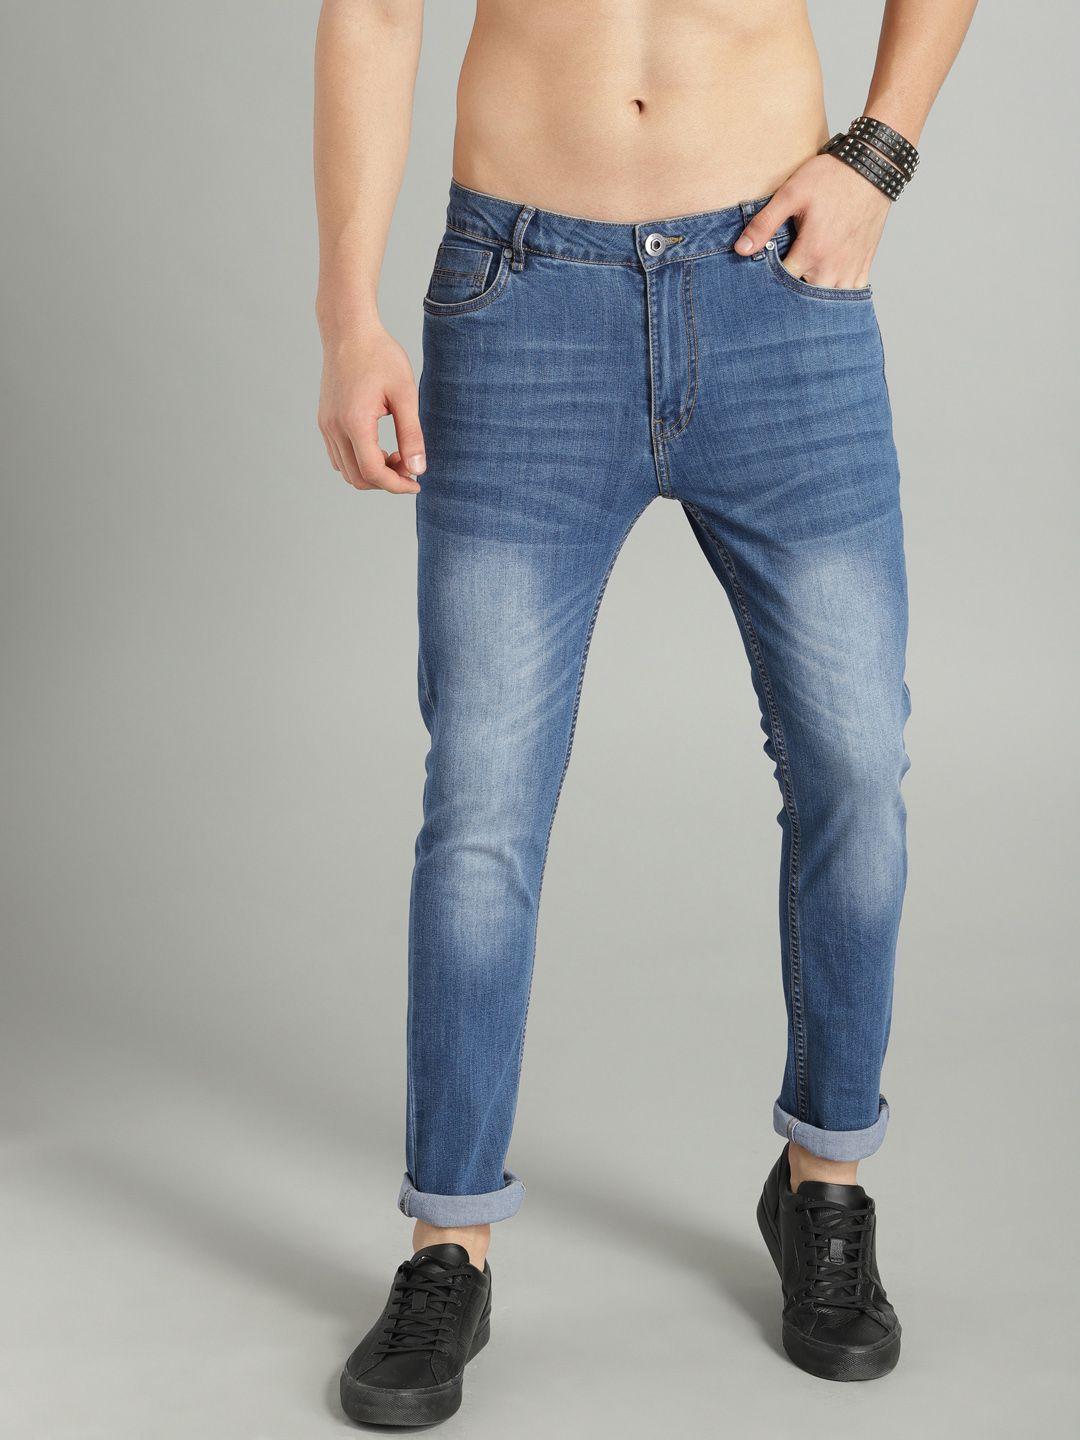 roadster-men-blue-skinny-fit-mid-rise-clean-look-stretchable-jeans